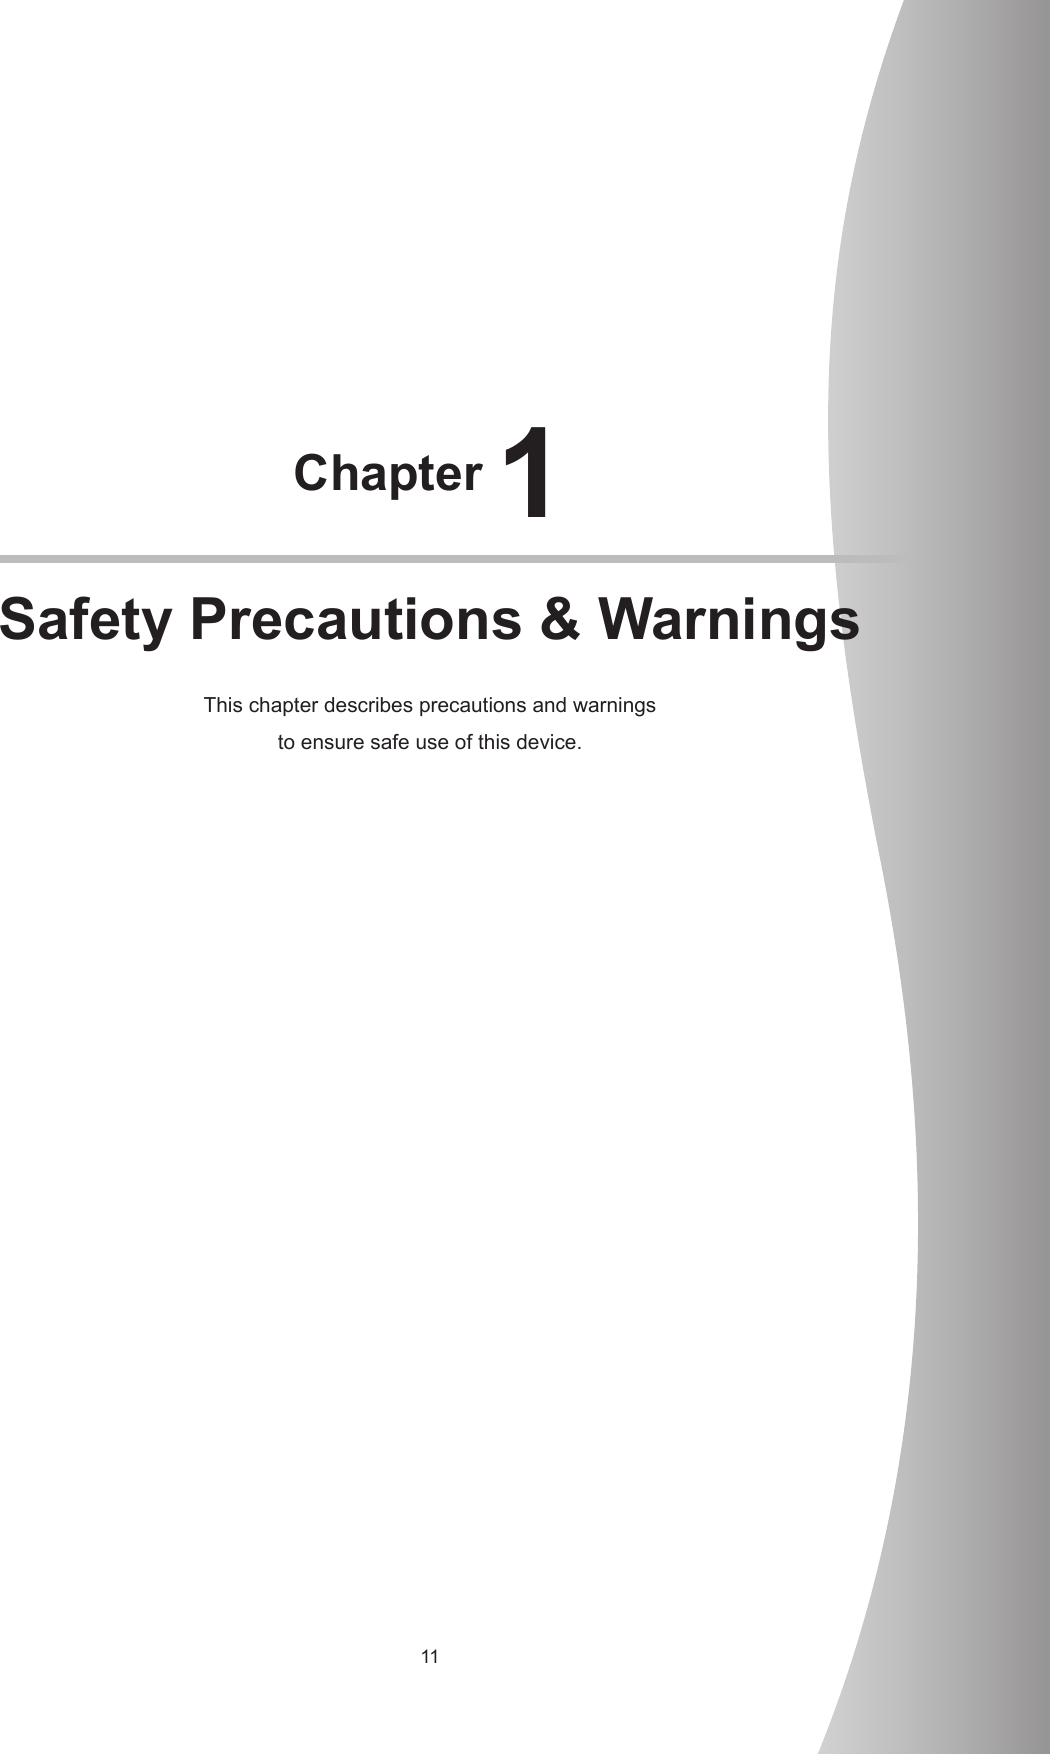 11Chapter 1Safety Precautions &amp; WarningsThis chapter describes precautions and warnings to ensure safe use of this device.